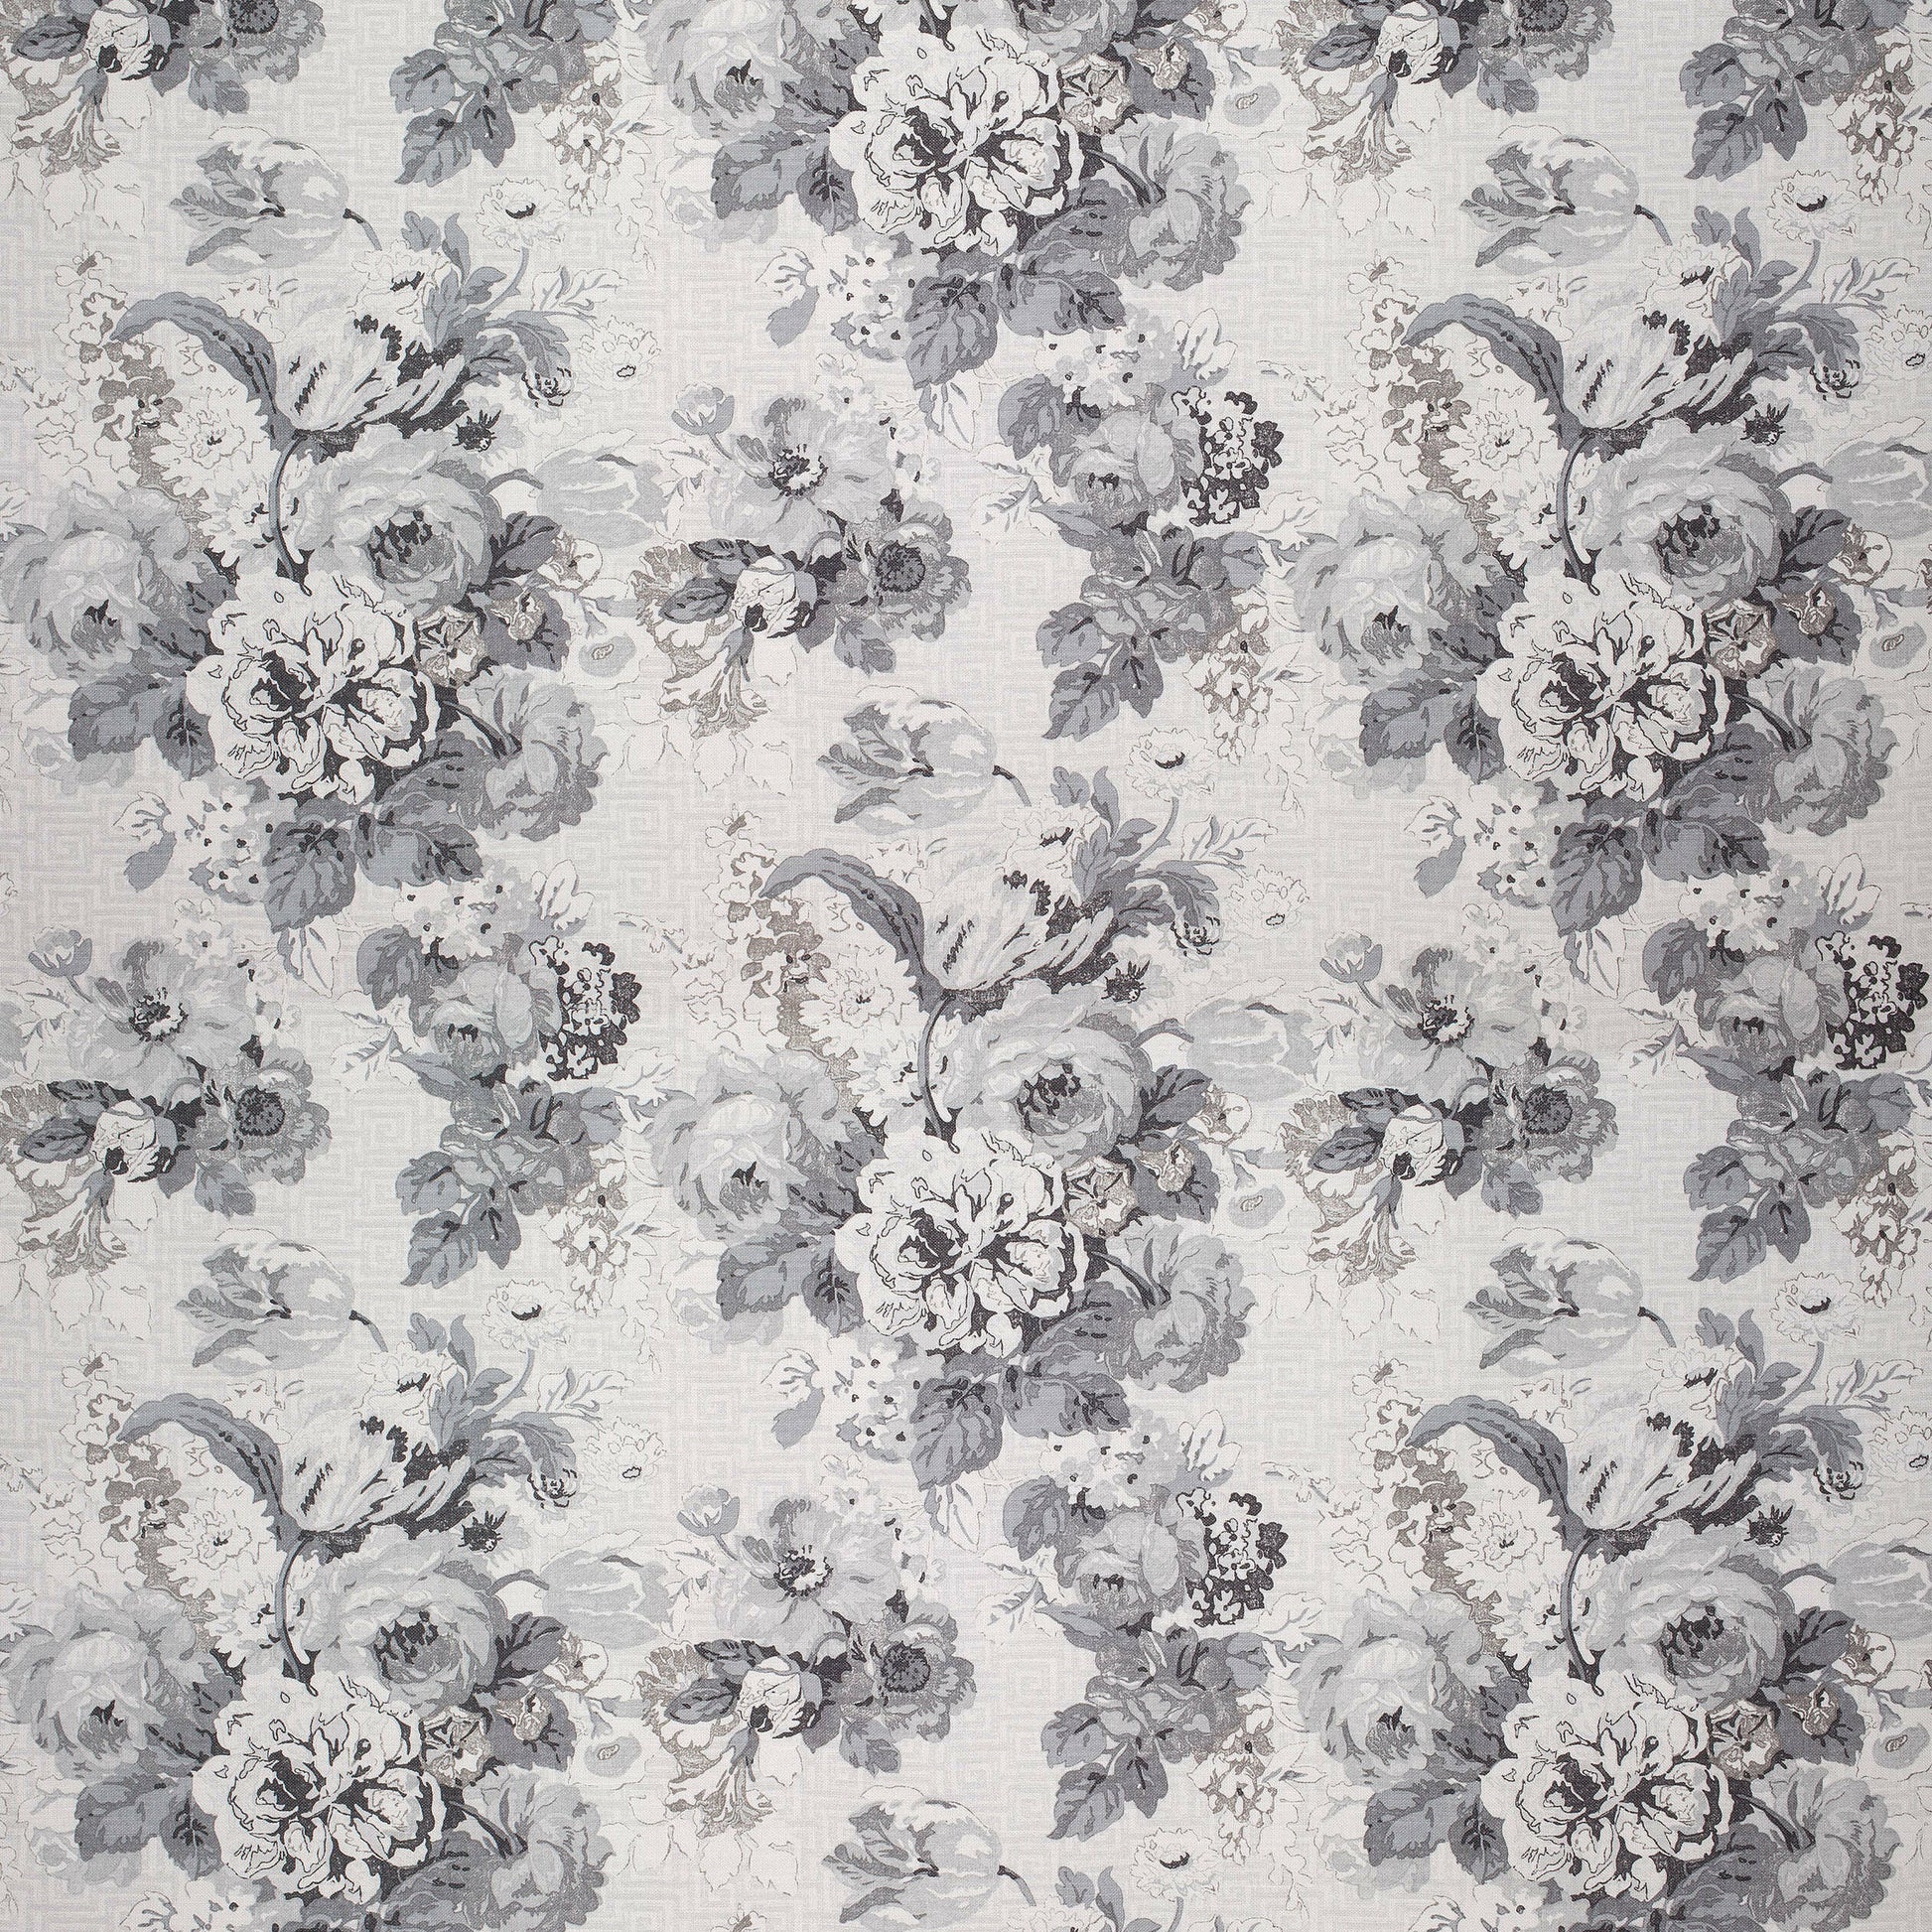 Purchase  Ann French Fabric Pattern# AF26135  pattern name  Wild Floral